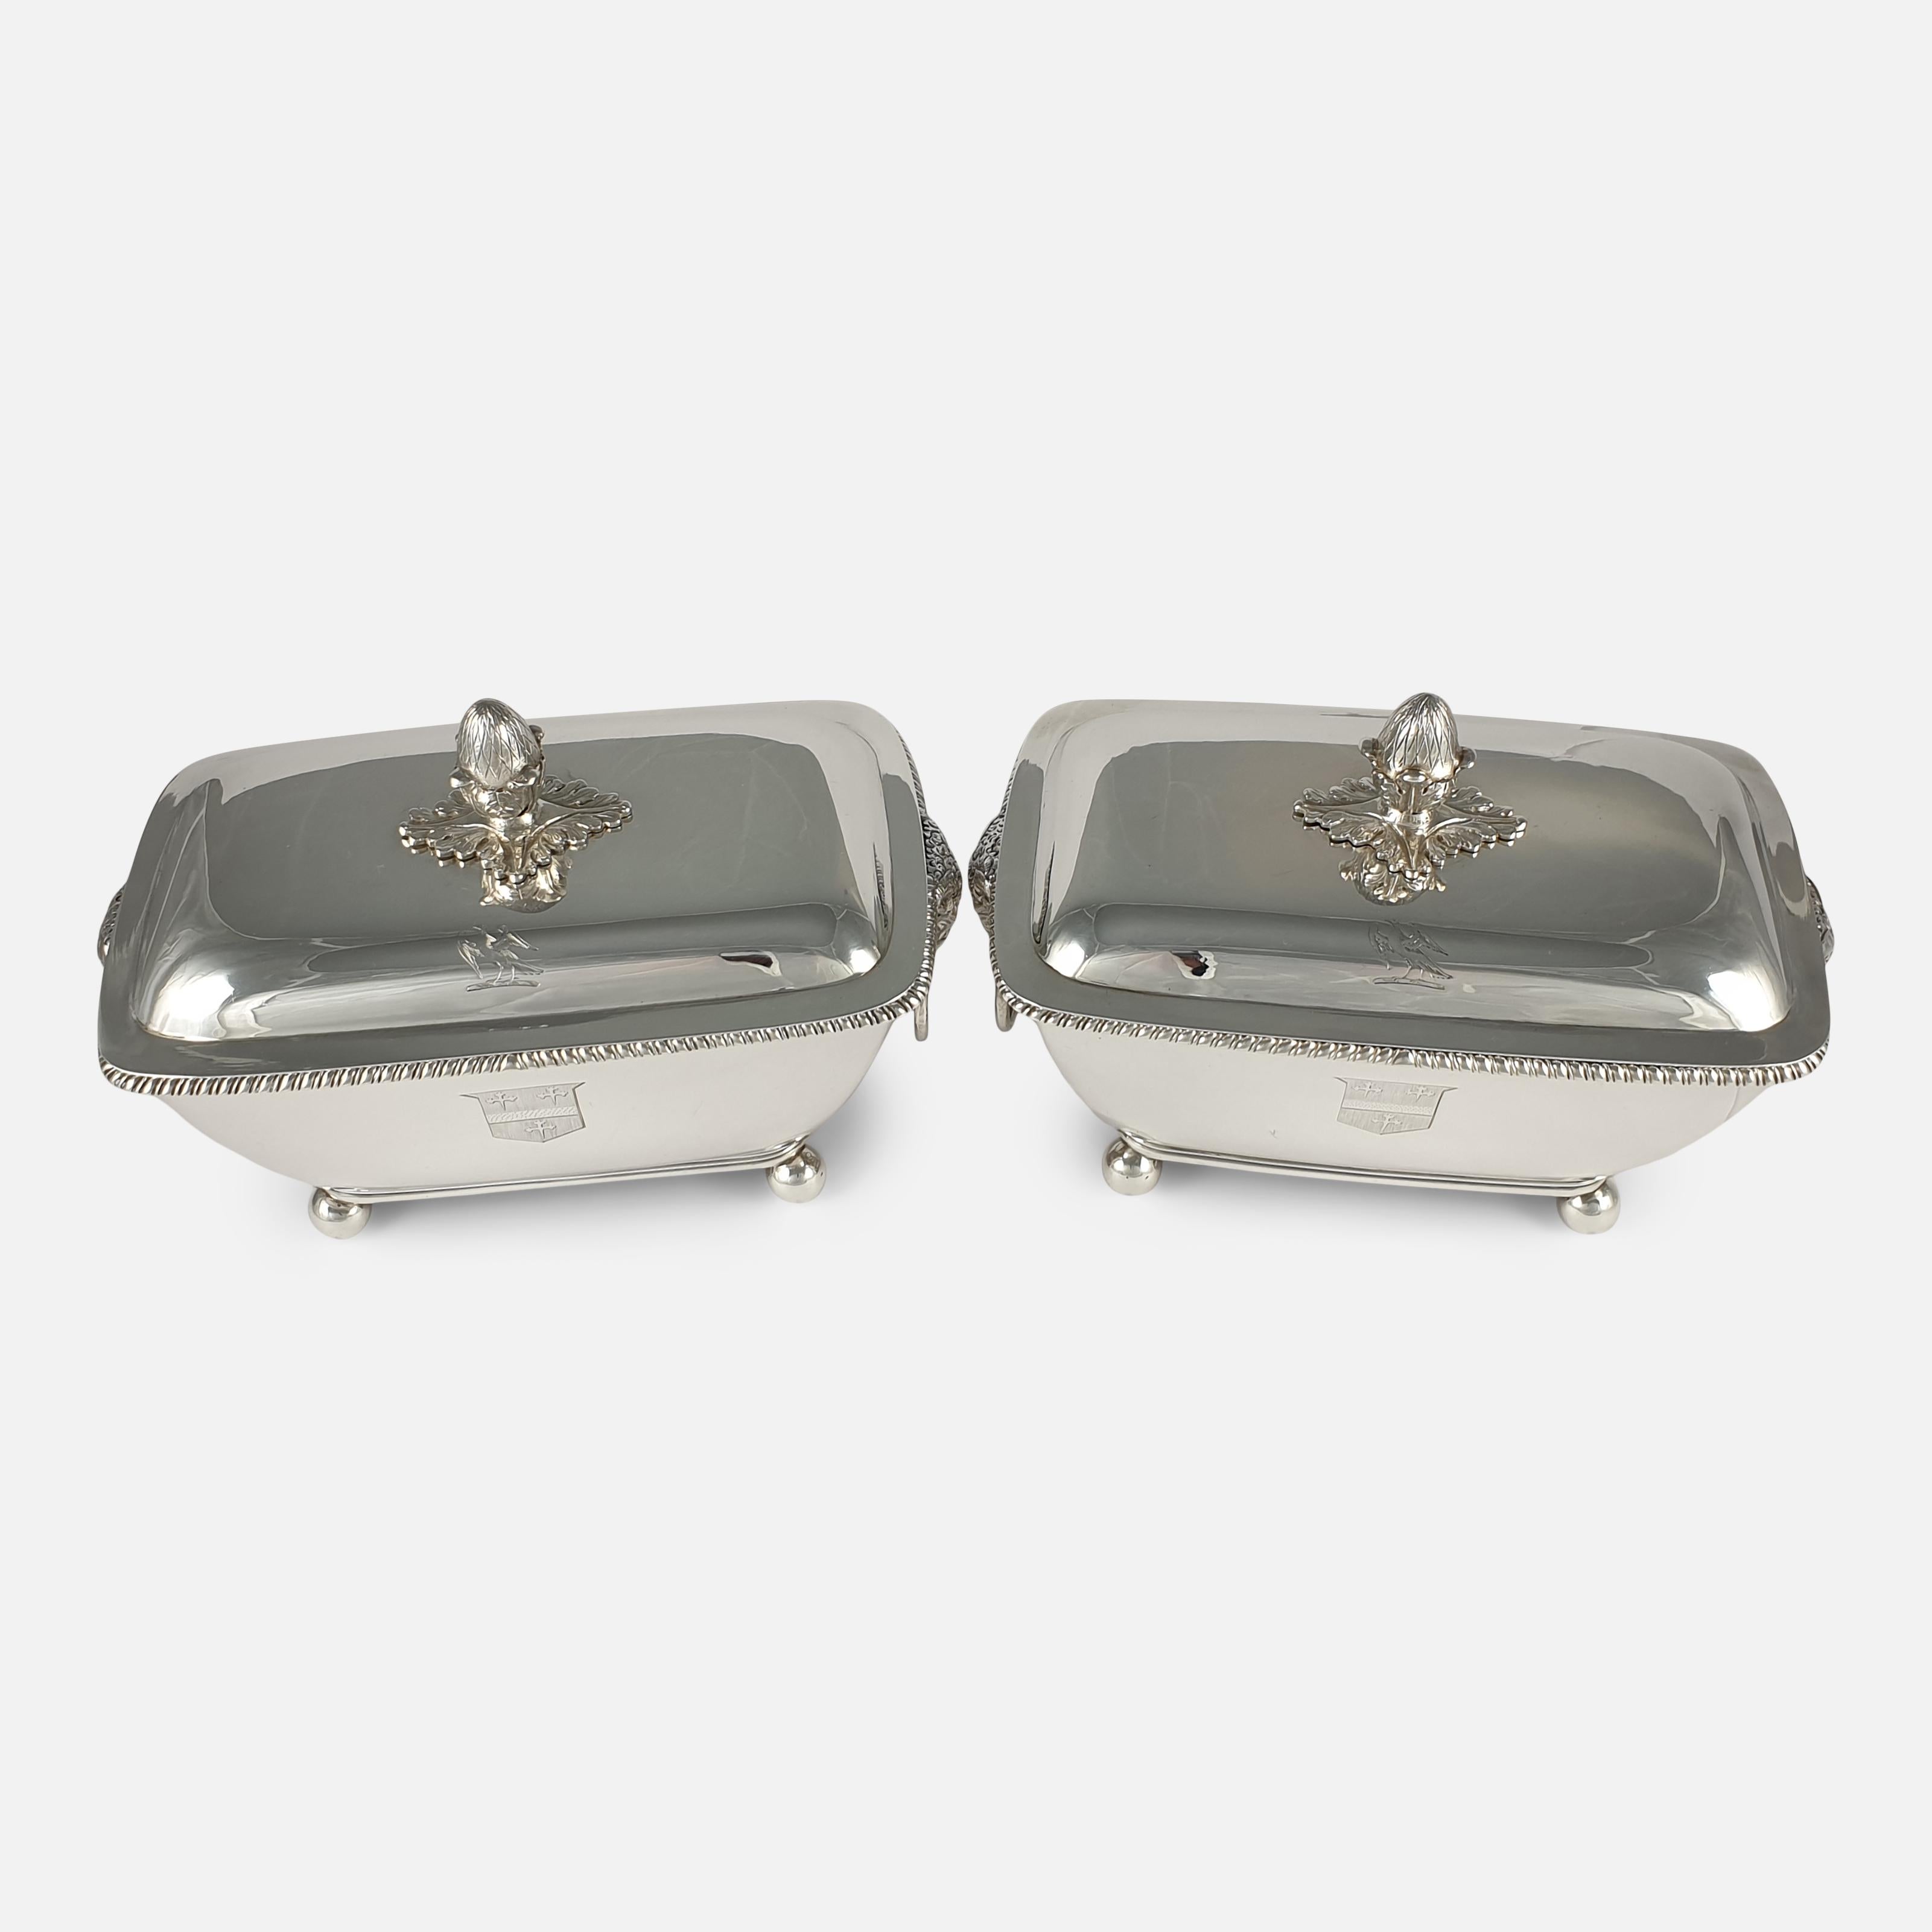 A pair of George III silver rounded rectangular sauce tureens and covers by John Robins, London, 1802. The pair of tureens are set with acorn finials to the shallow domed covers, having twin ram's mask ring handles, and are both engraved with a